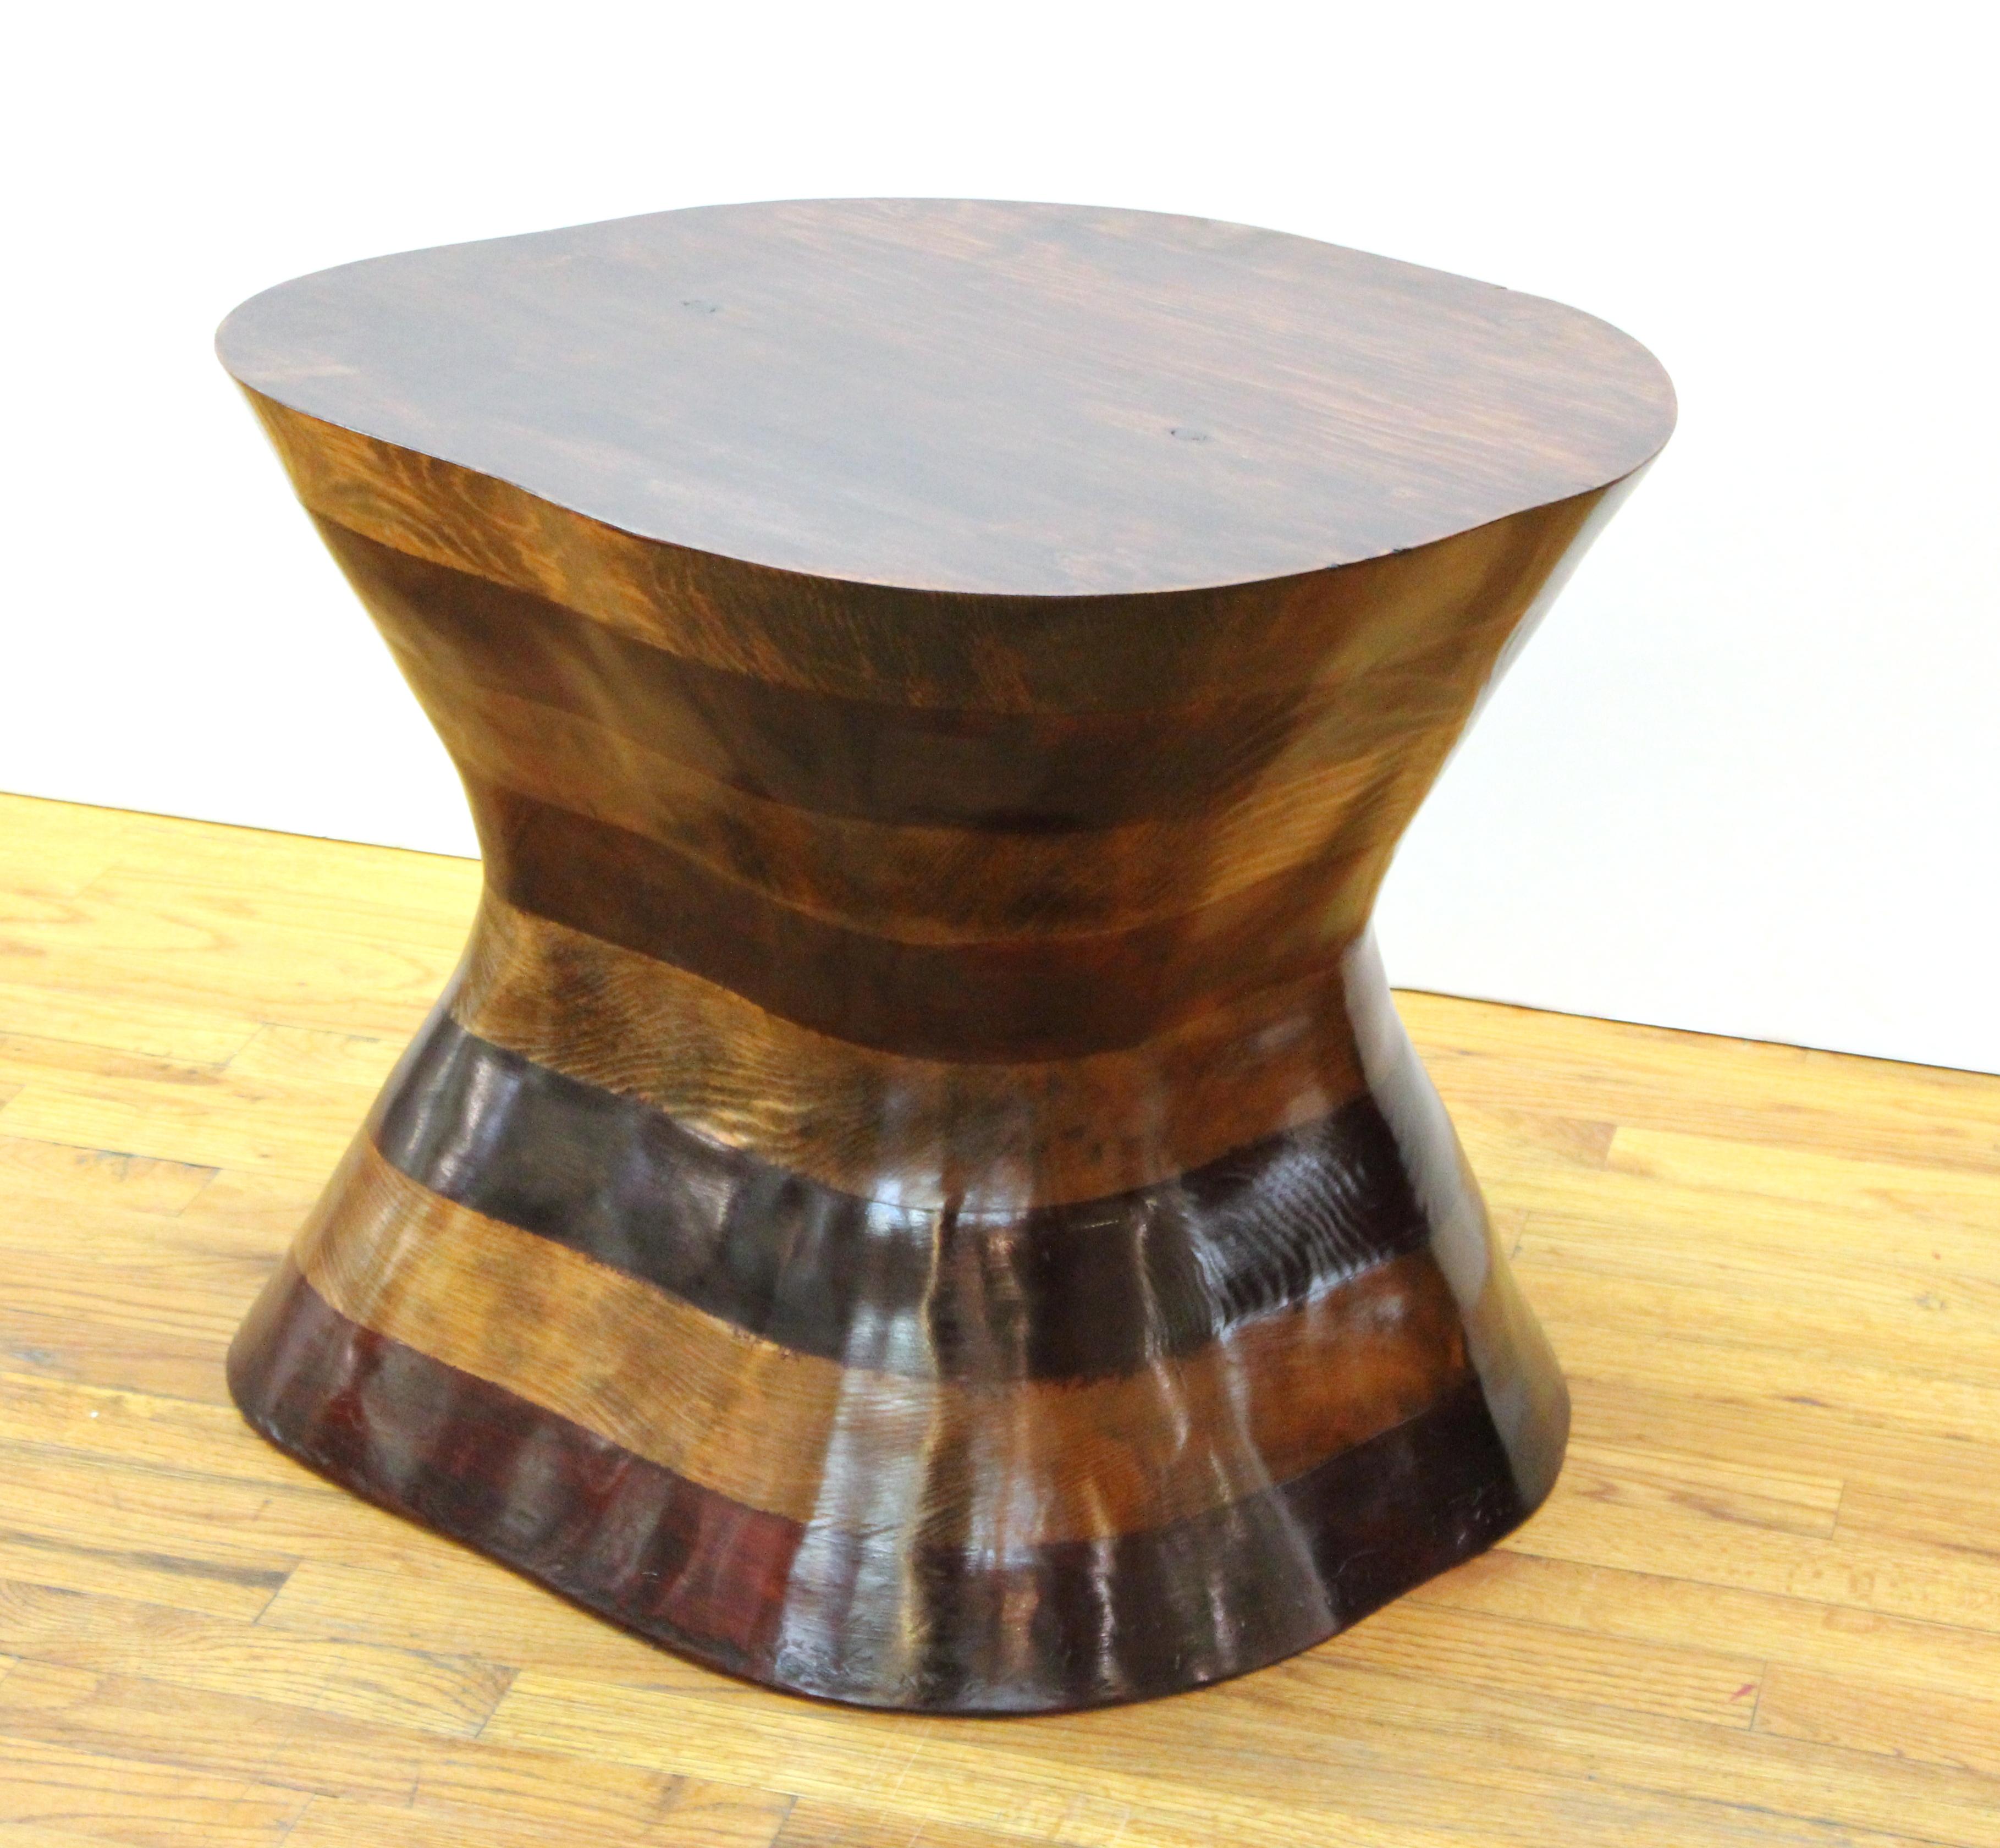 Wendell castle style Postmodern wood side table or low pedestal in carved and stained wood. The piece was likely made during the 1980s and is in great vintage condition with age-appropriate wear and use.